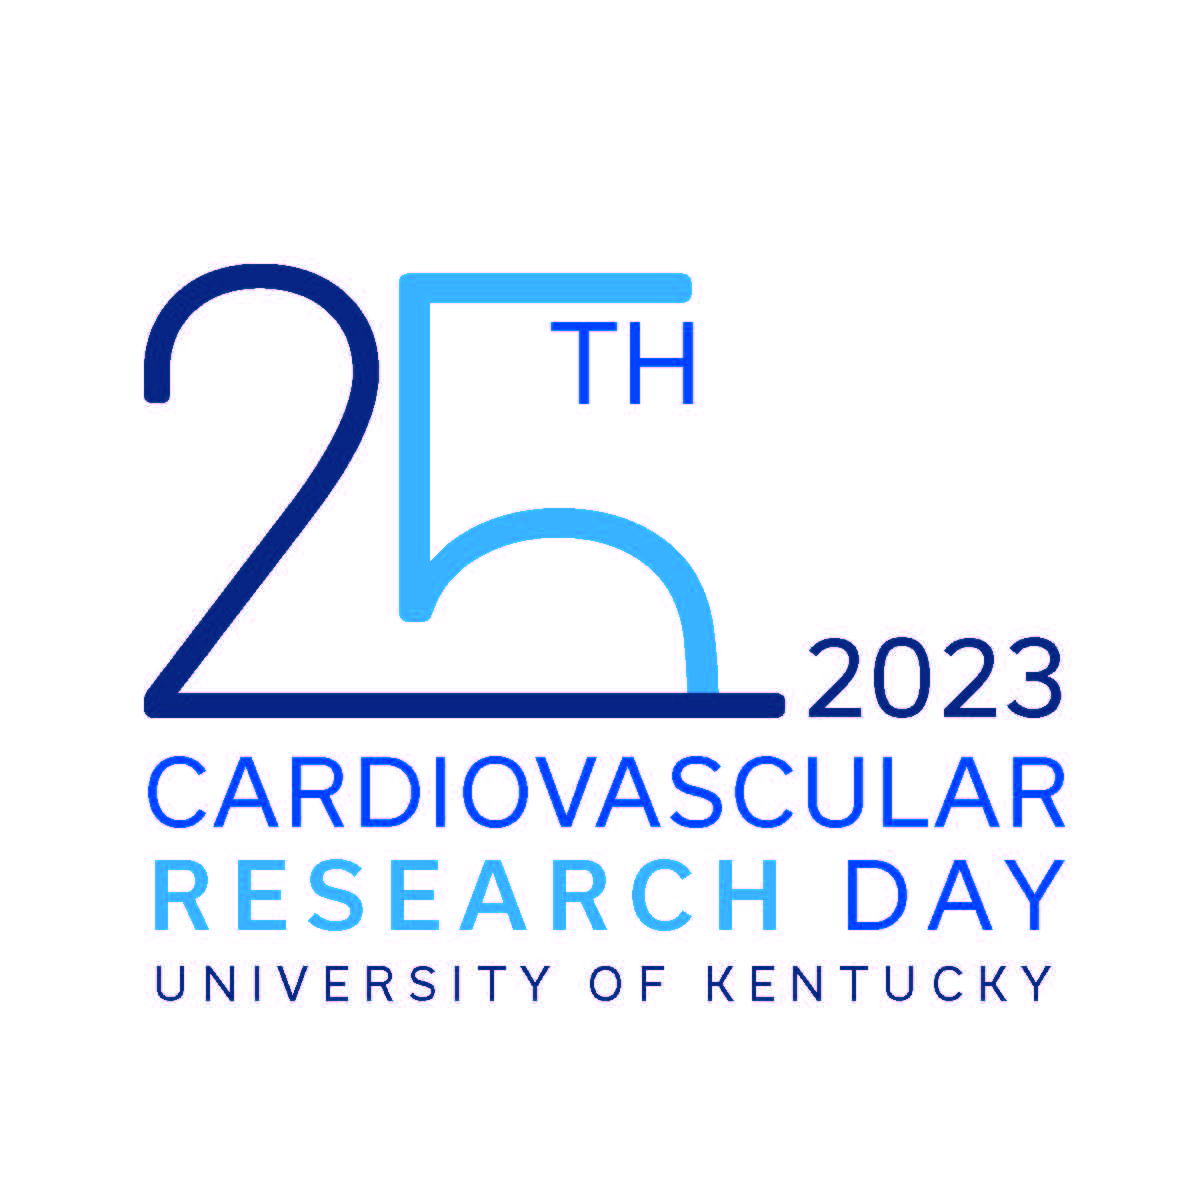 25th Cardiovascular Research Day, 2023. University of Kentucky